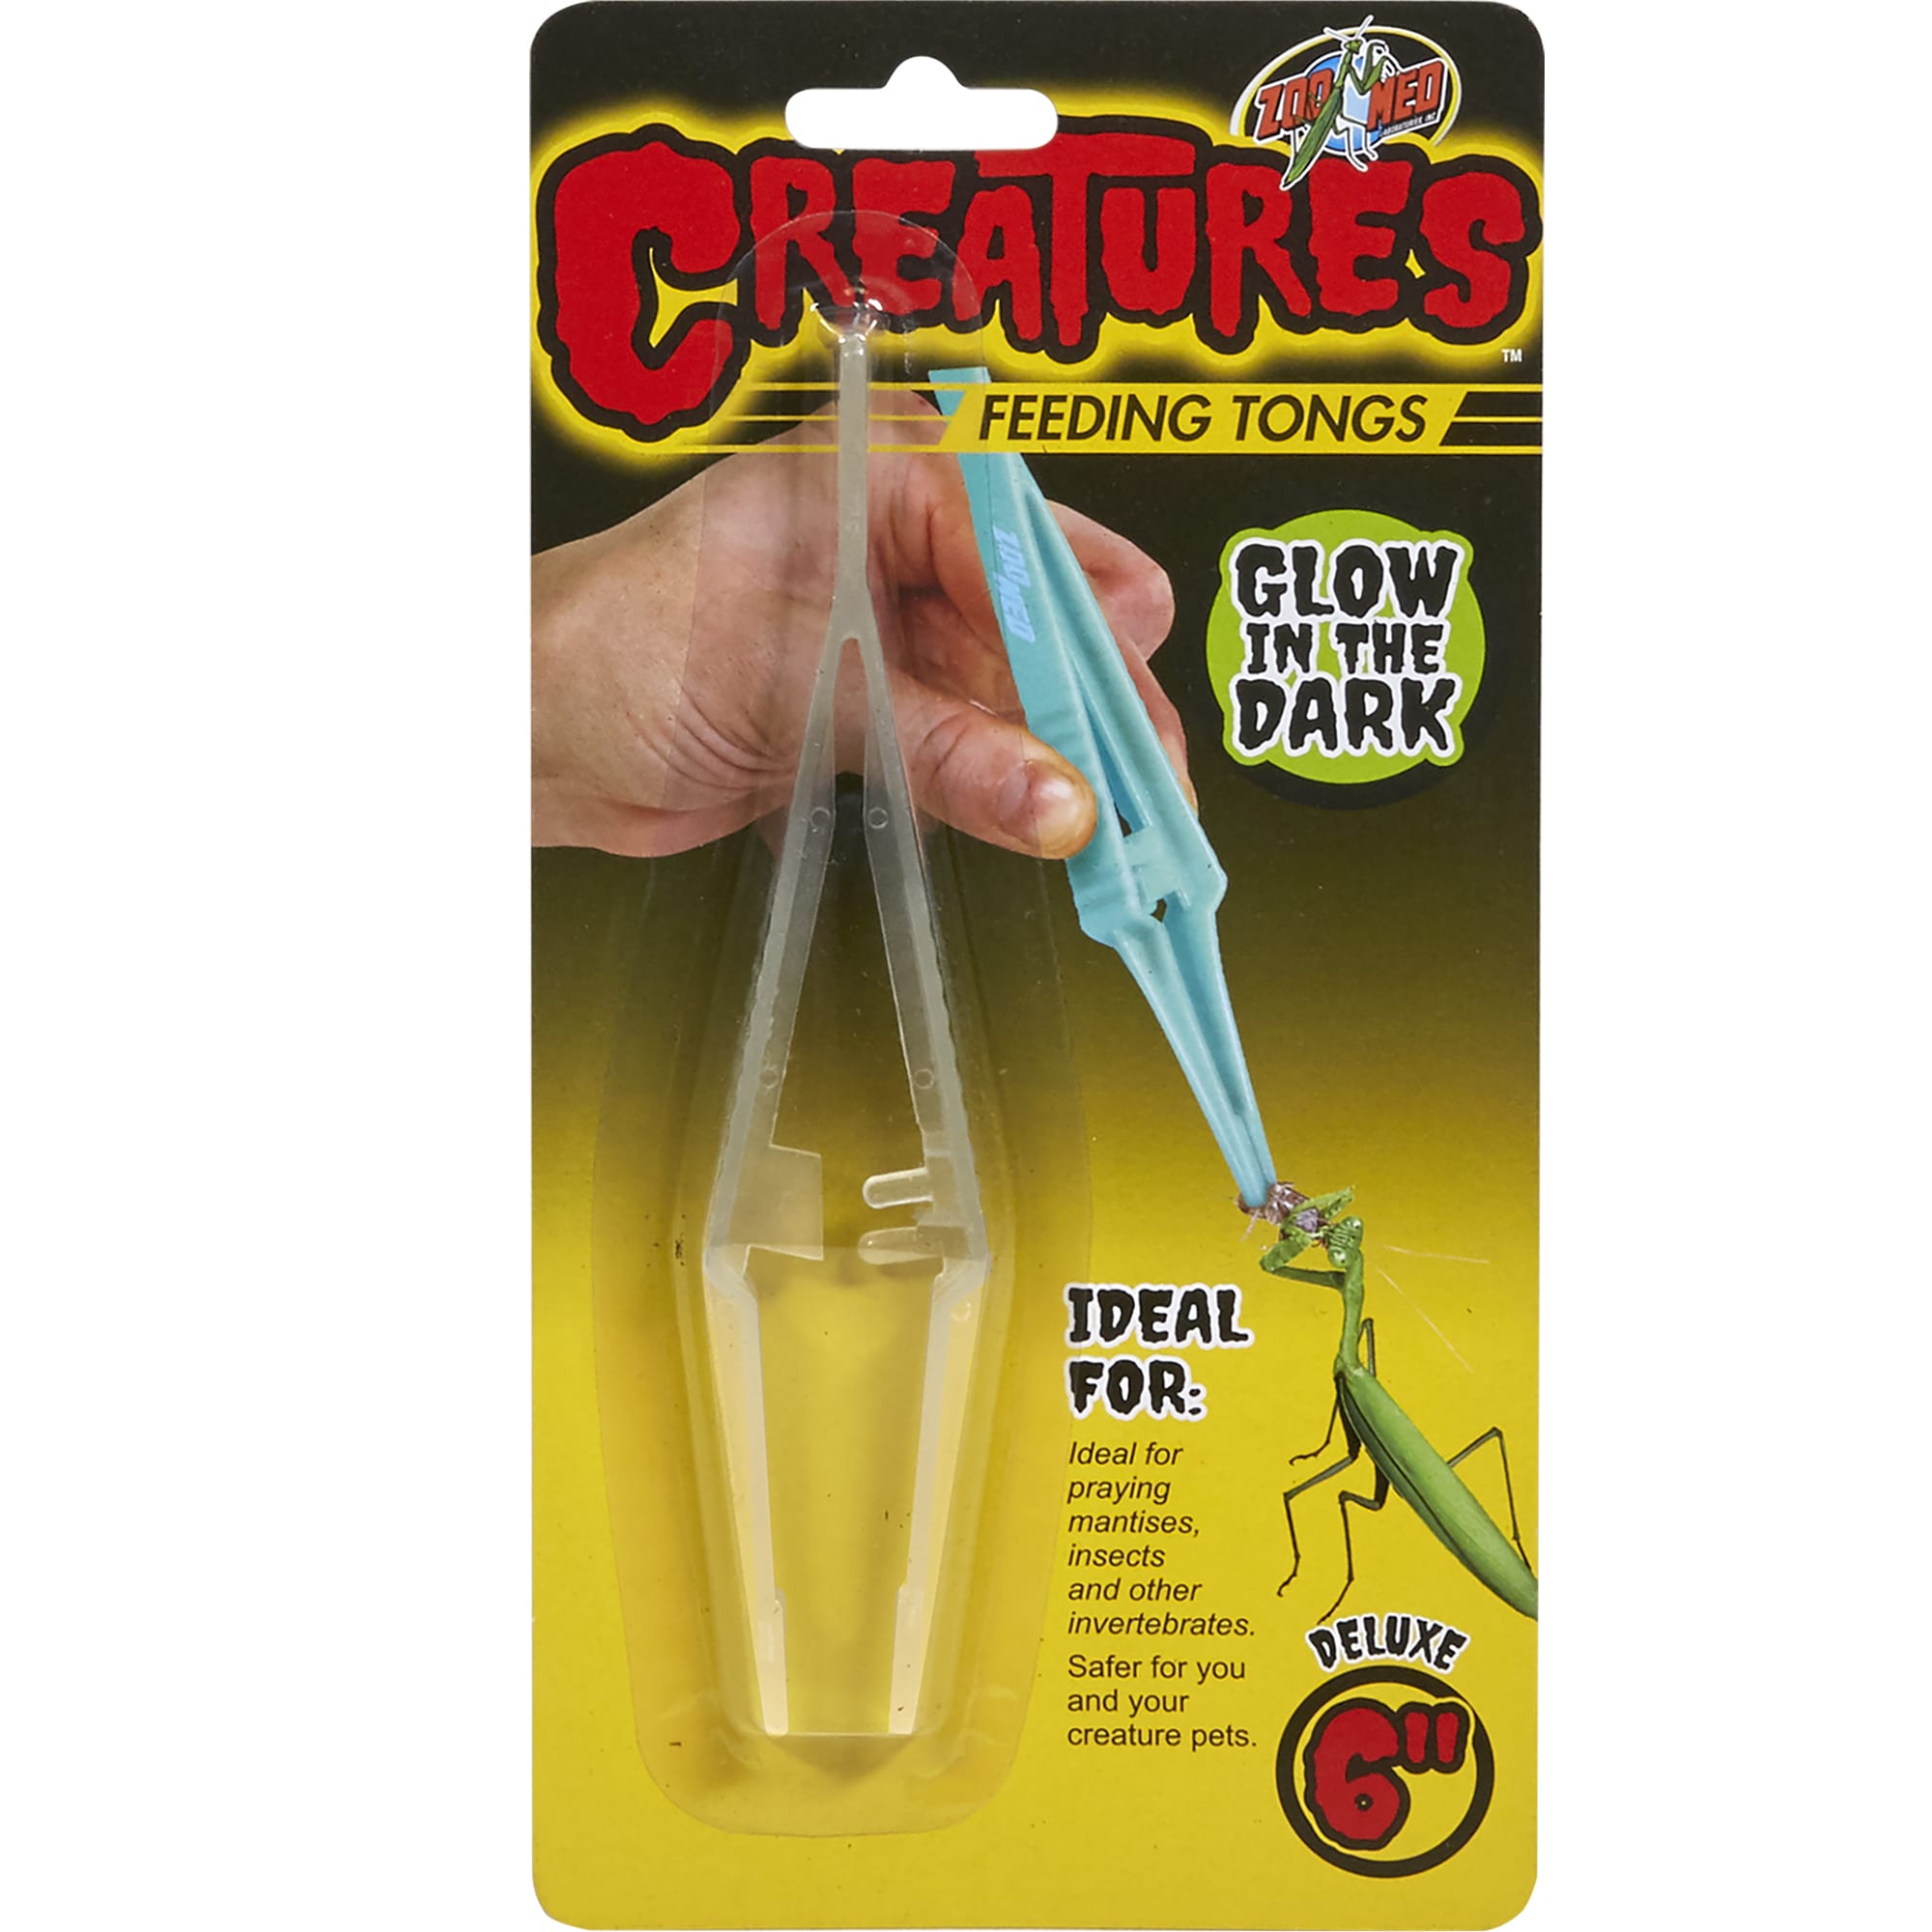 UPC 097612008203 product image for Zoo Med Creatures Feeding Tongs Glow in the Dark, 10 Gallon, Transparent | upcitemdb.com